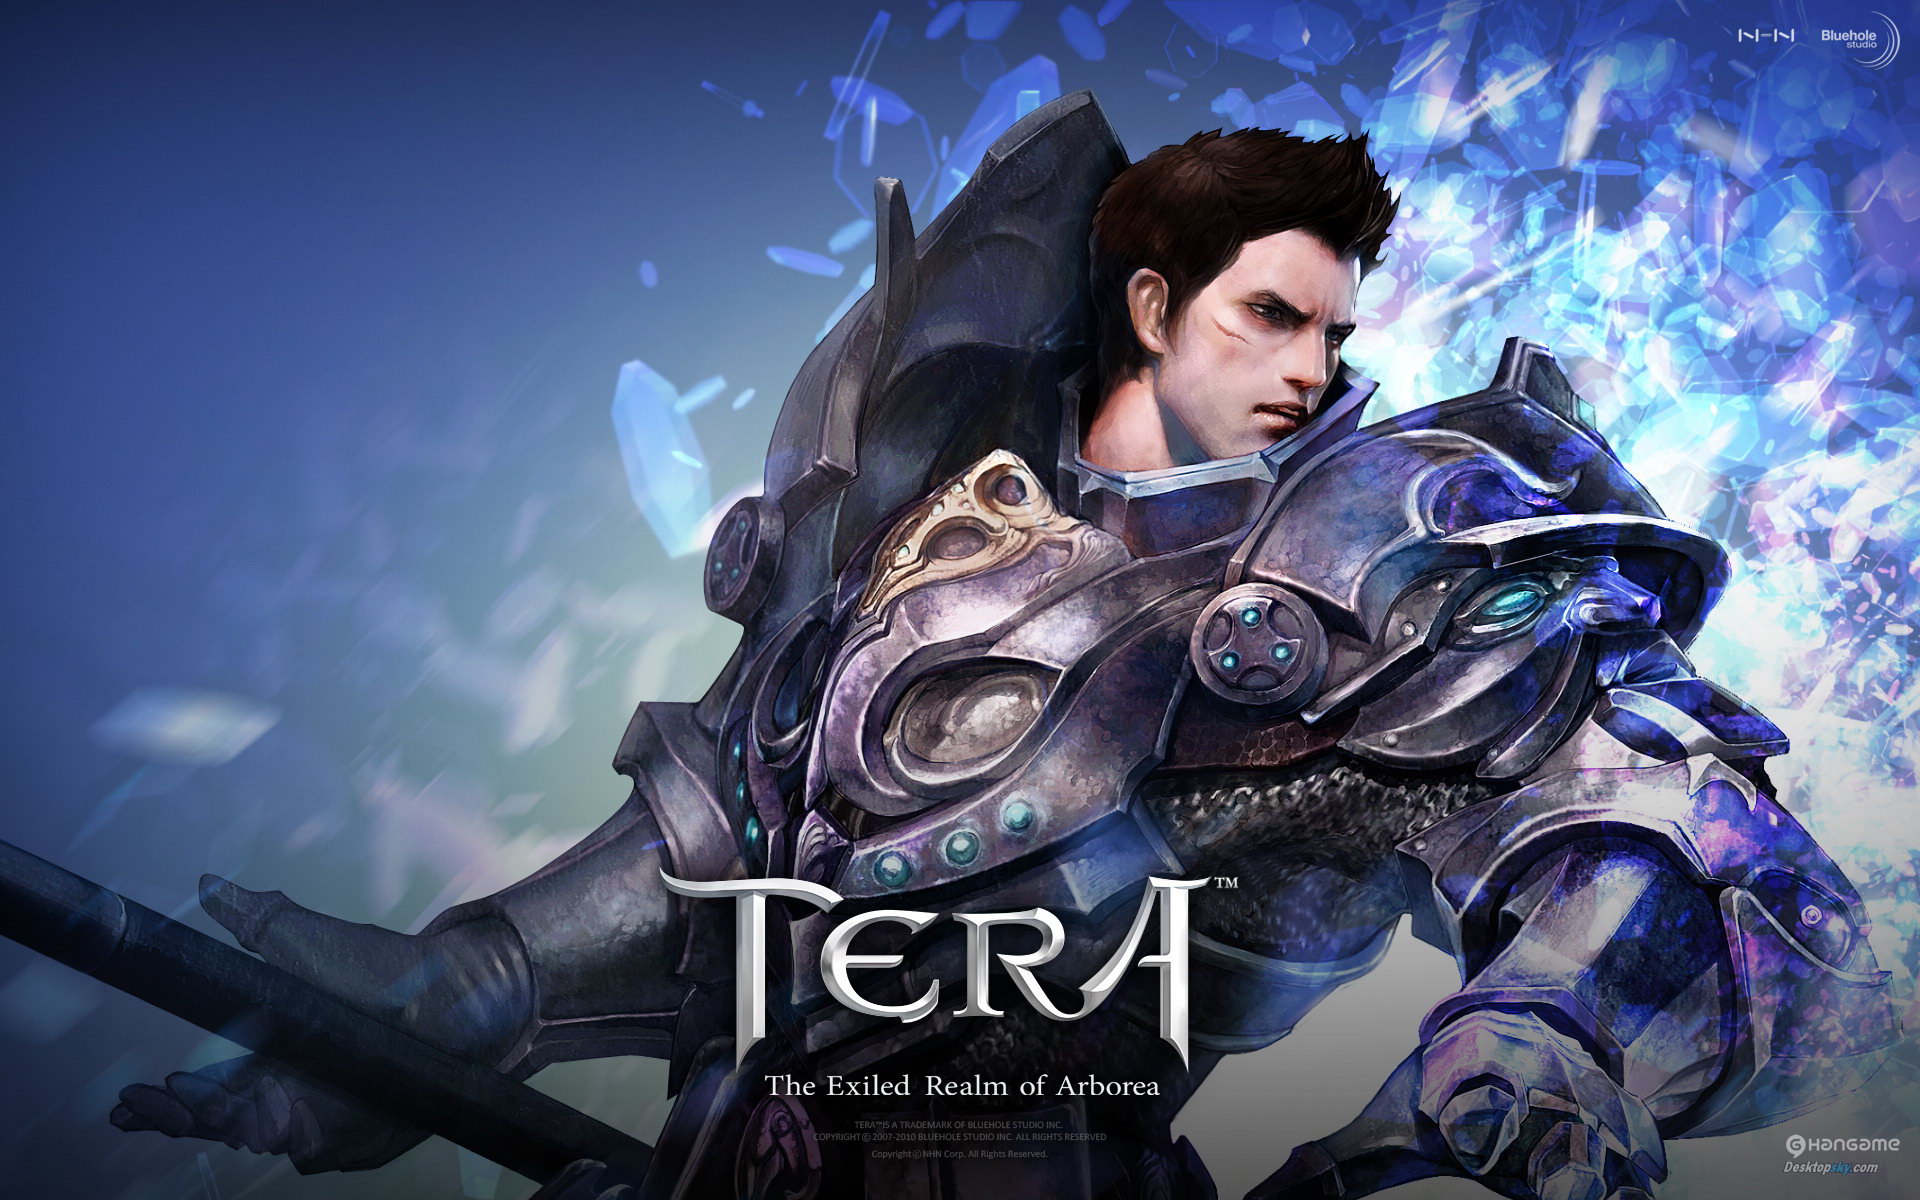  the other wallpapers of Tera You are downloading Tera wallpaper 14